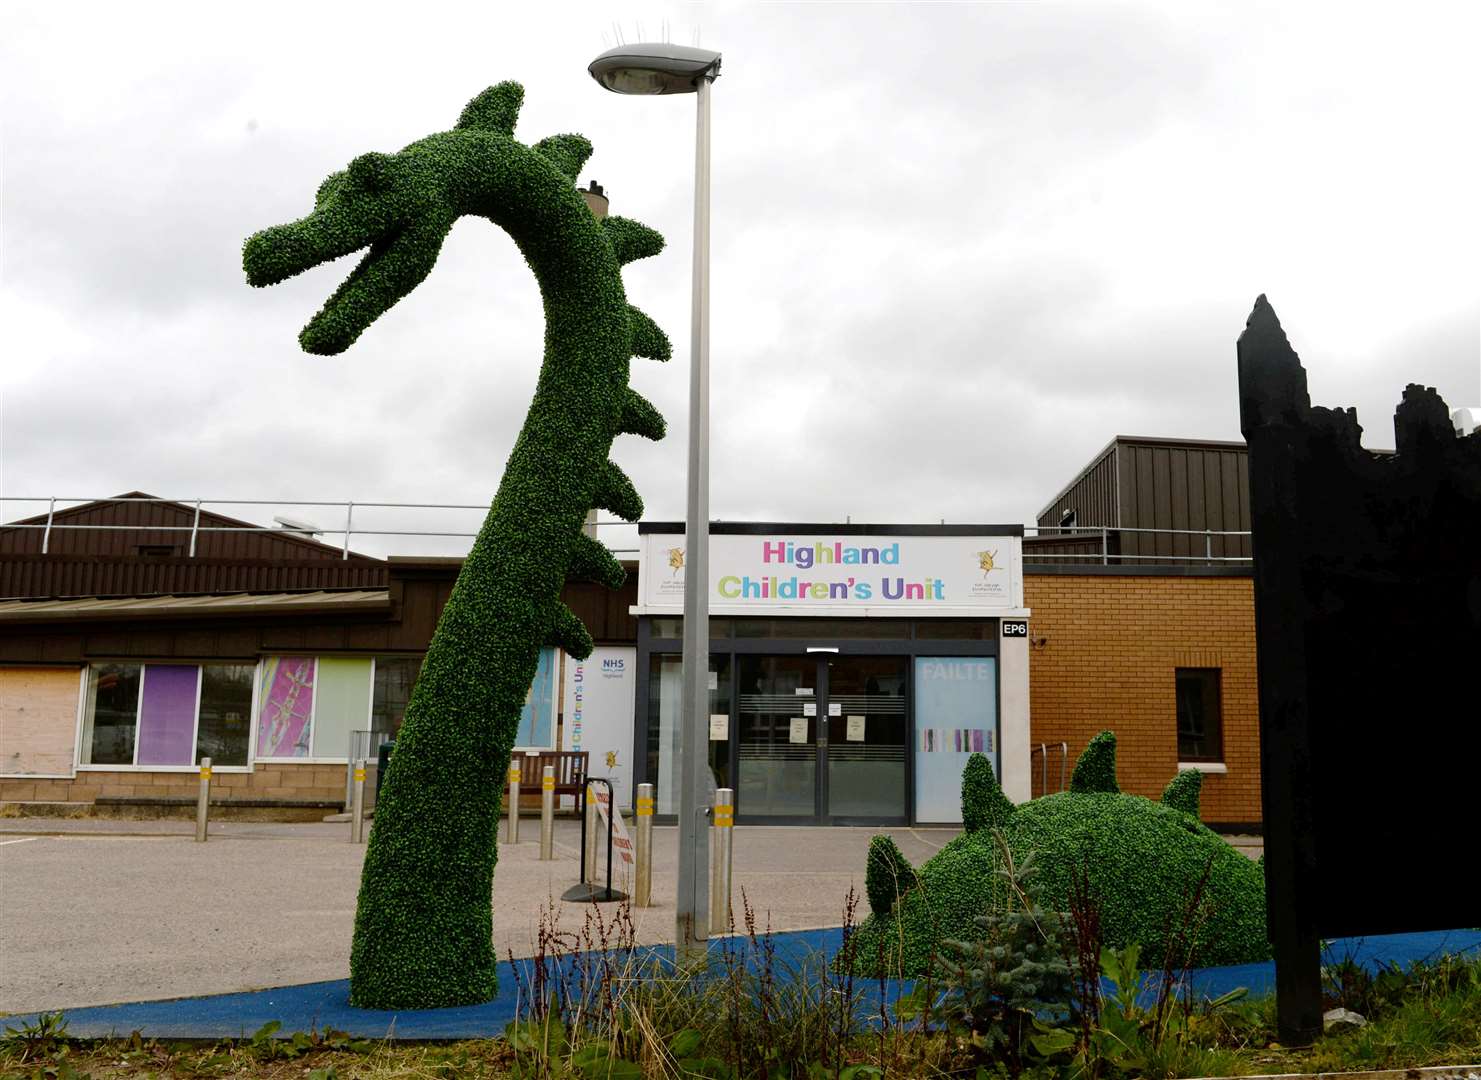 The entrance to the Highland Children's Unit at Raigmore Hospital.